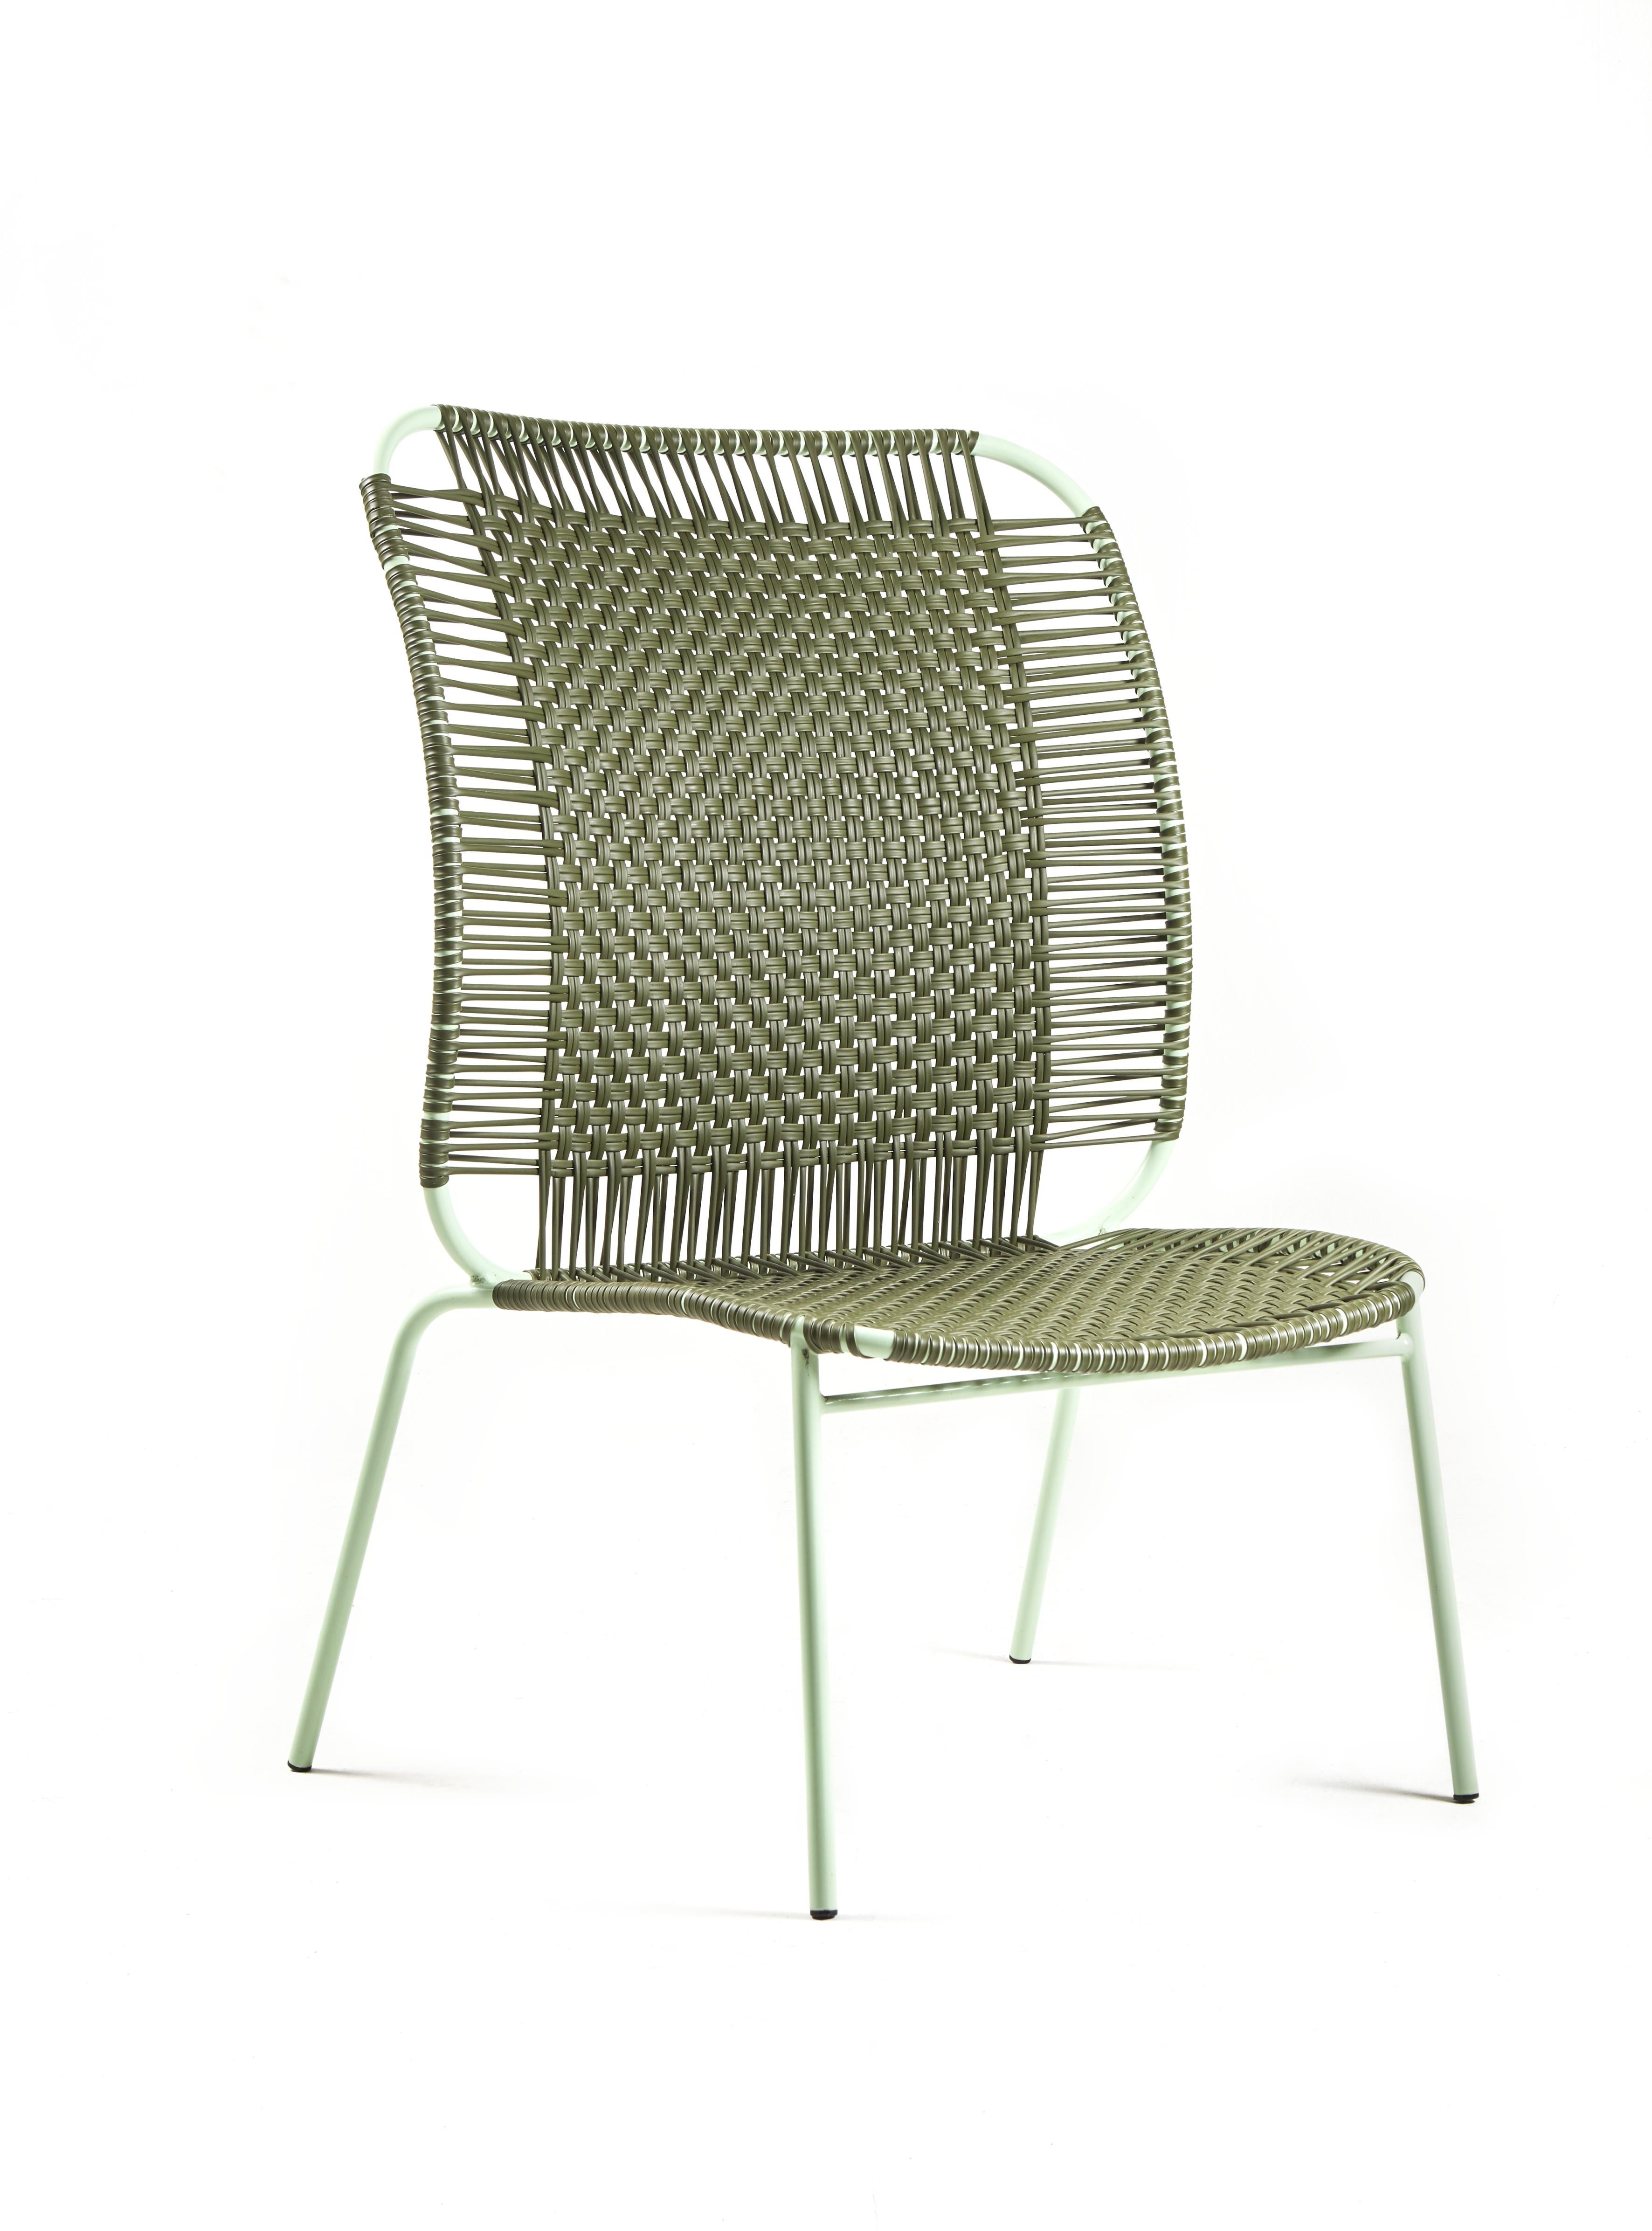 Set of 4 Olive Cielo lounge high chair by Sebastian Herkner
Materials: Galvanized and powder-coated tubular steel. PVC strings are made from recycled plastic.
Technique: Made from recycled plastic and weaved by local craftspeople in Cartagena,